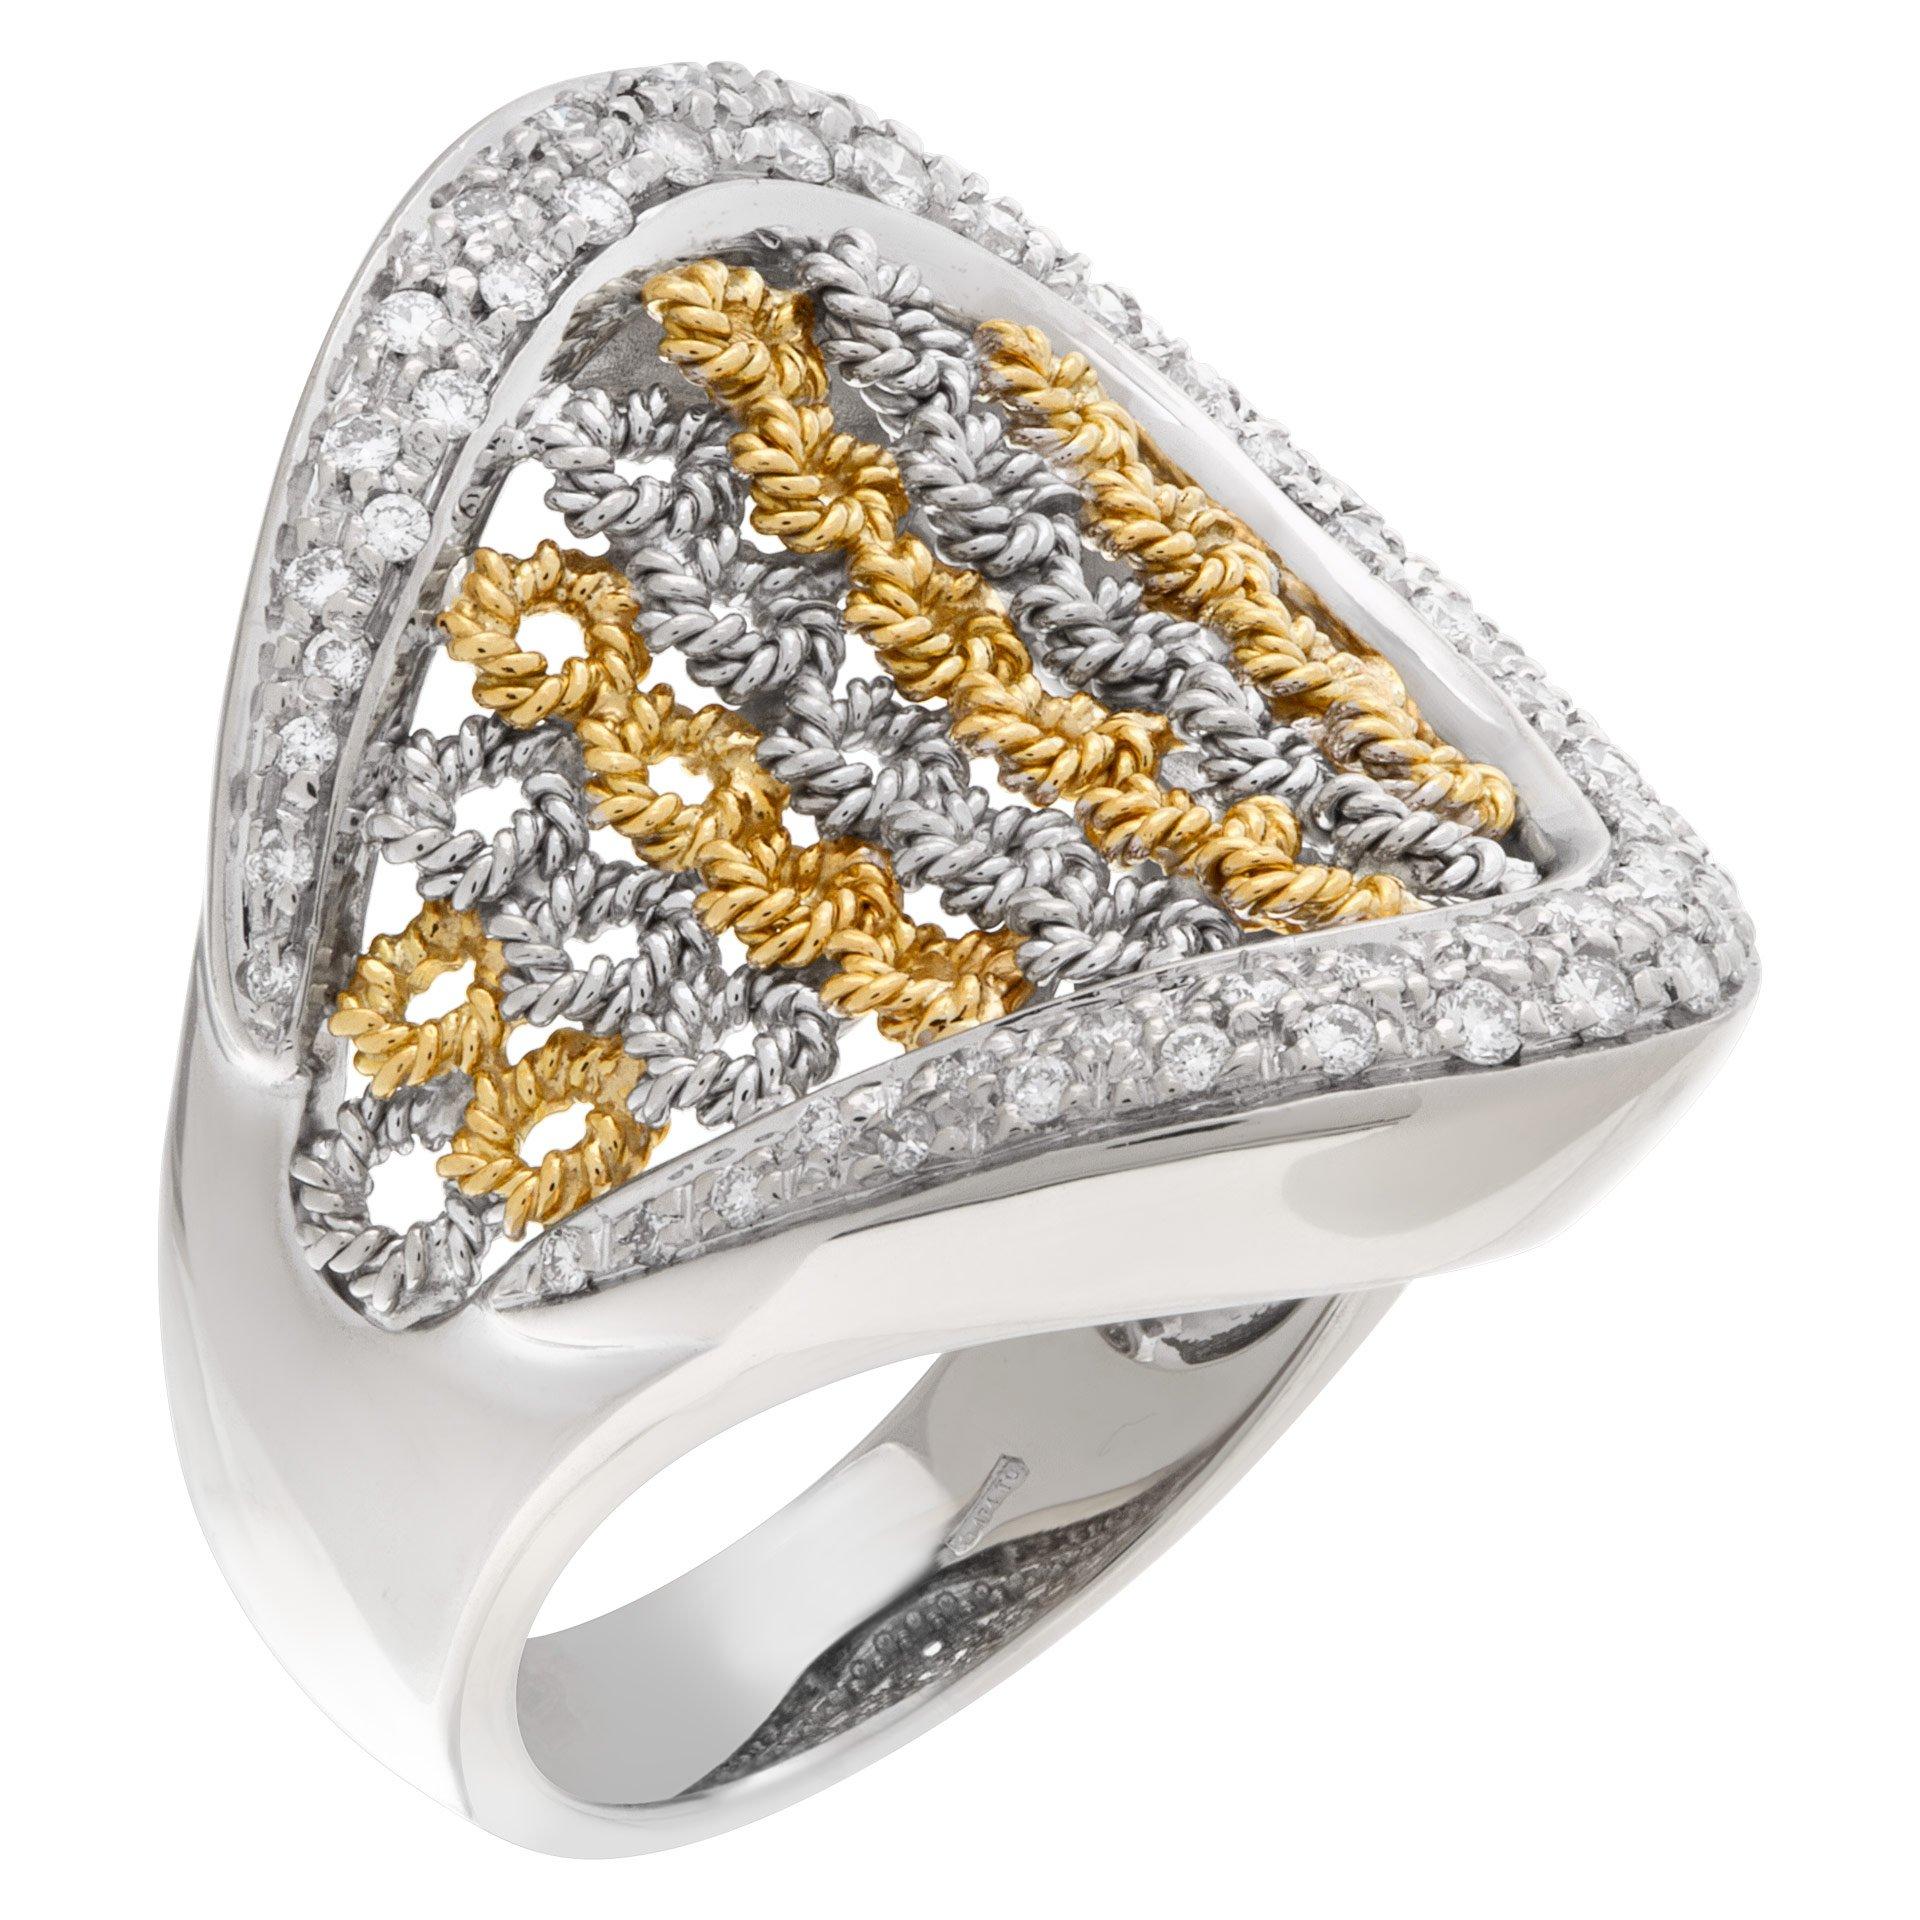 Basket weave with surrounding diamond pave approximately 0.50 carat G-H color, VS-SI clarity set in 18k white and yellow gold. Size 7.5 and 26.5 mm width.

This Diamond ring is currently size 7.5 and some items can be sized up or down, please ask!